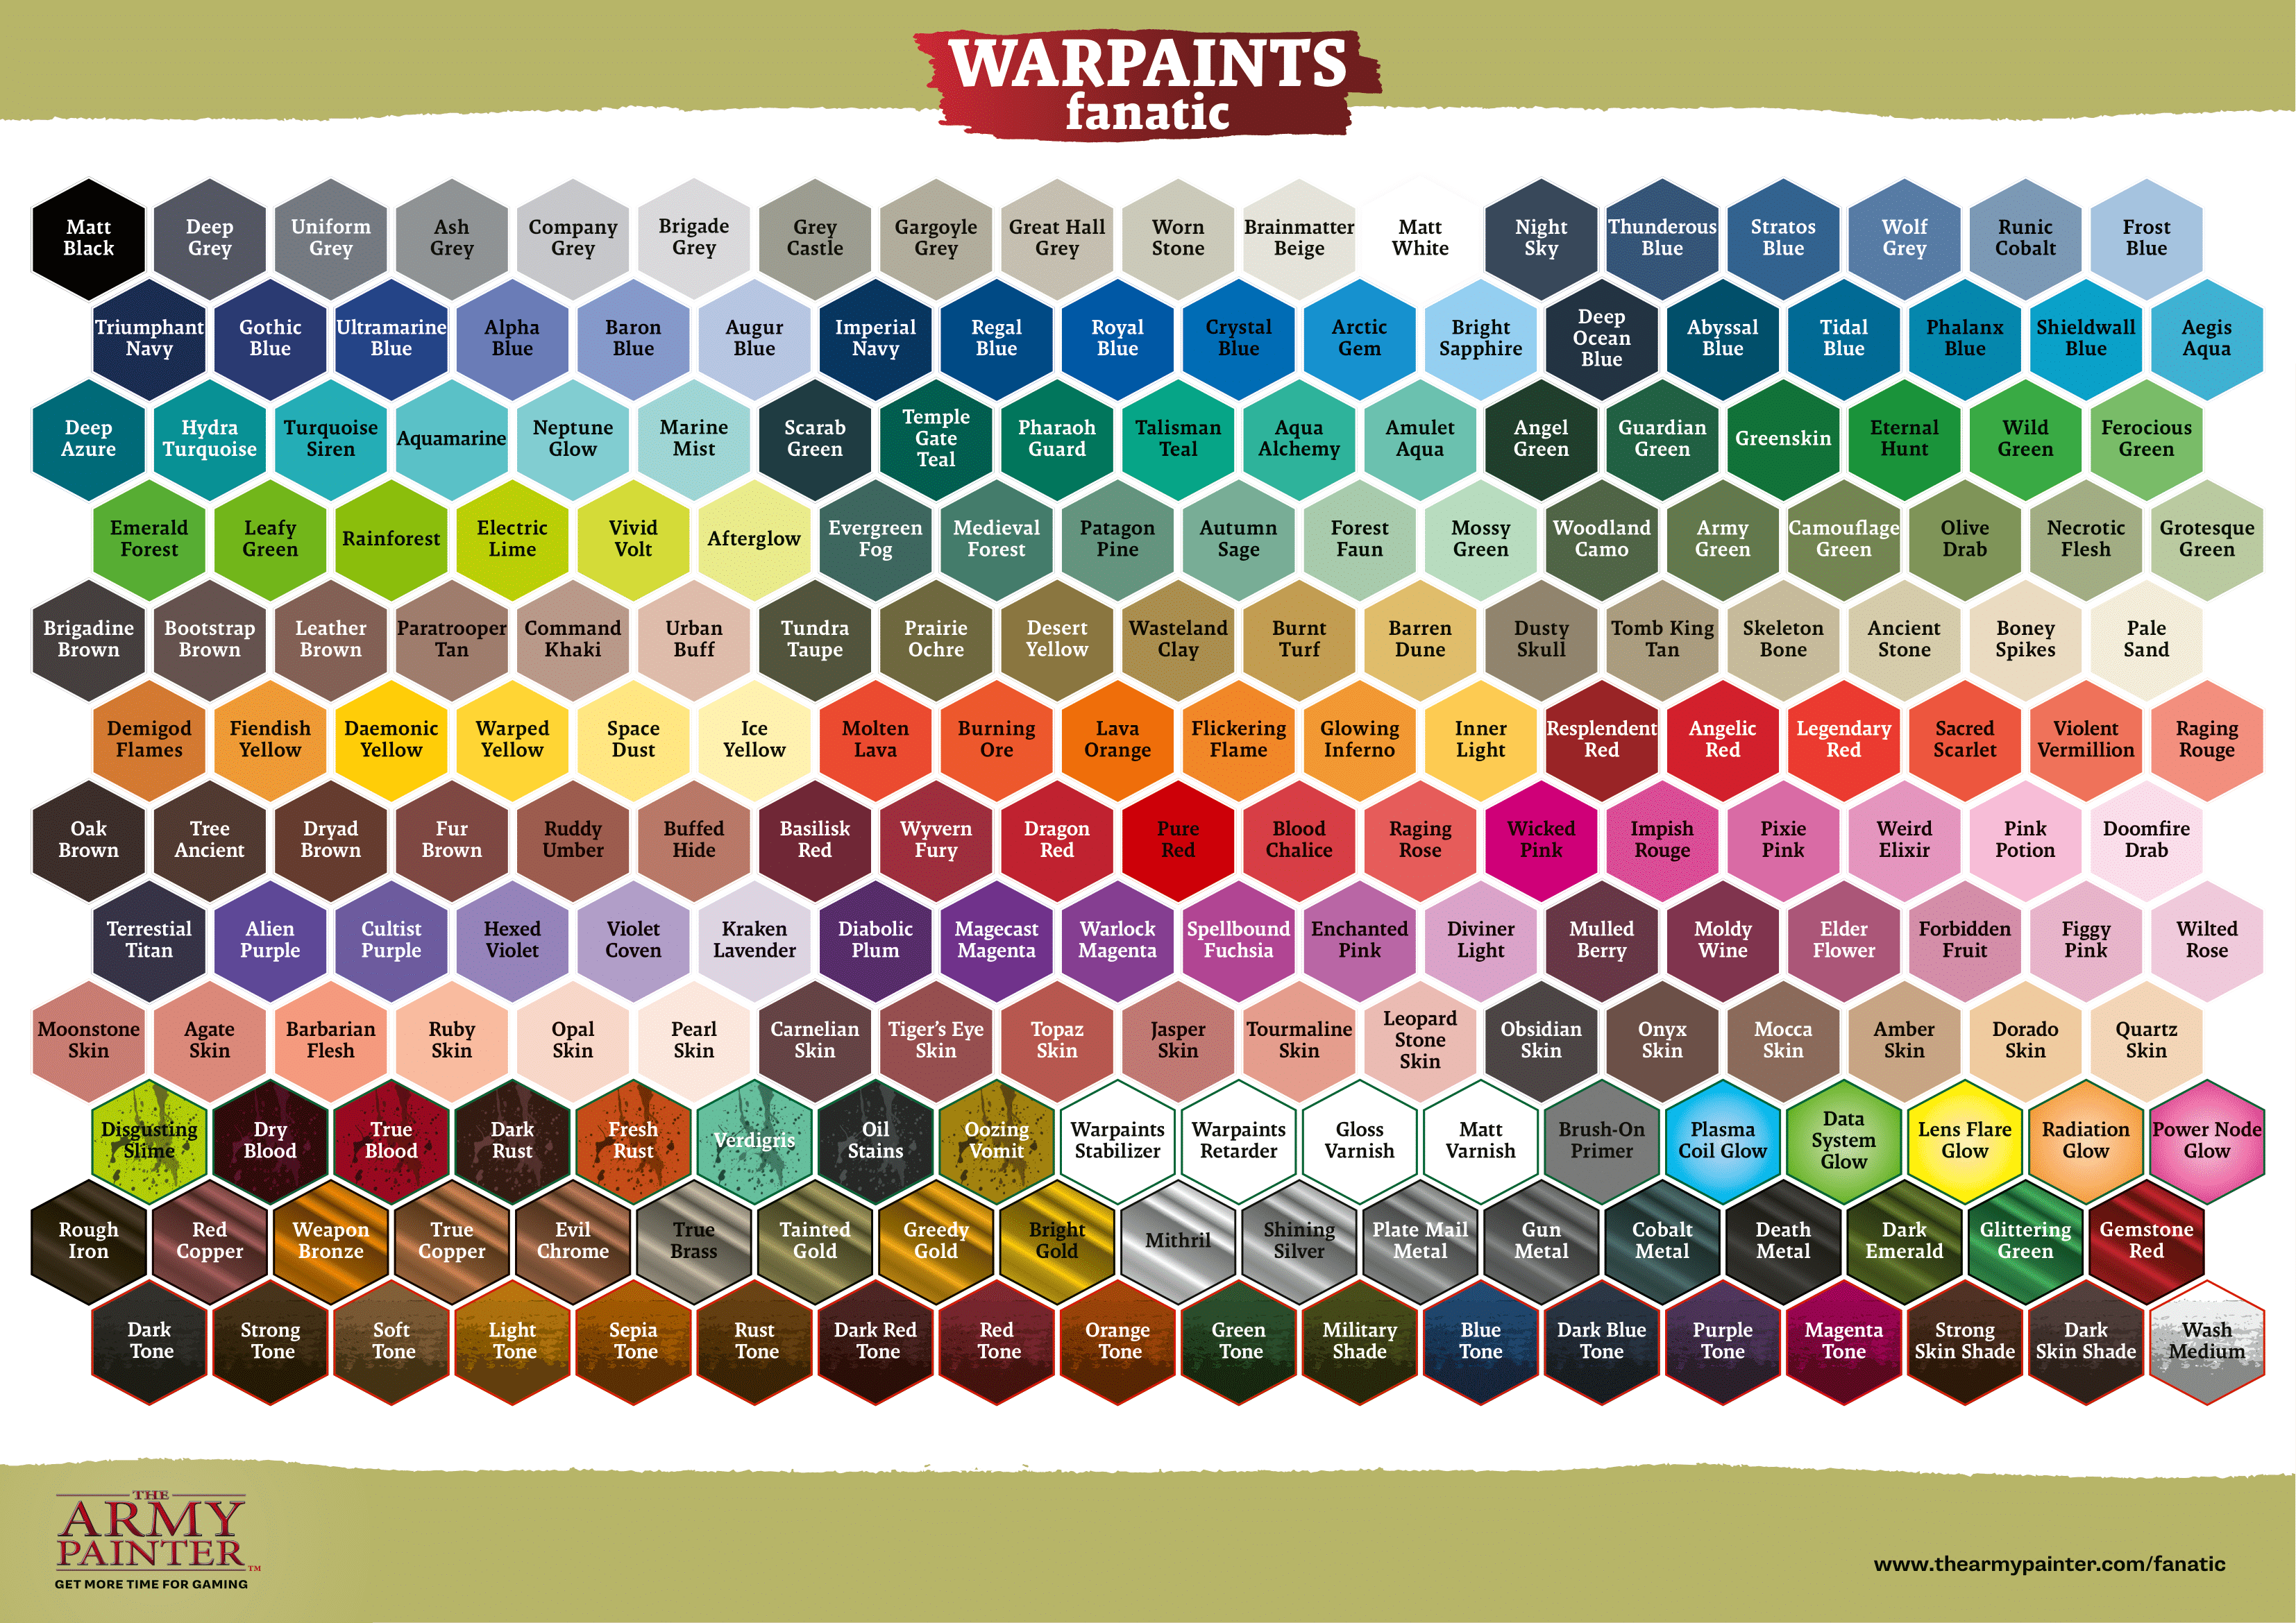 Army Painter Warpaints Fanatic Full Collection (WP3001 - WP3096 )